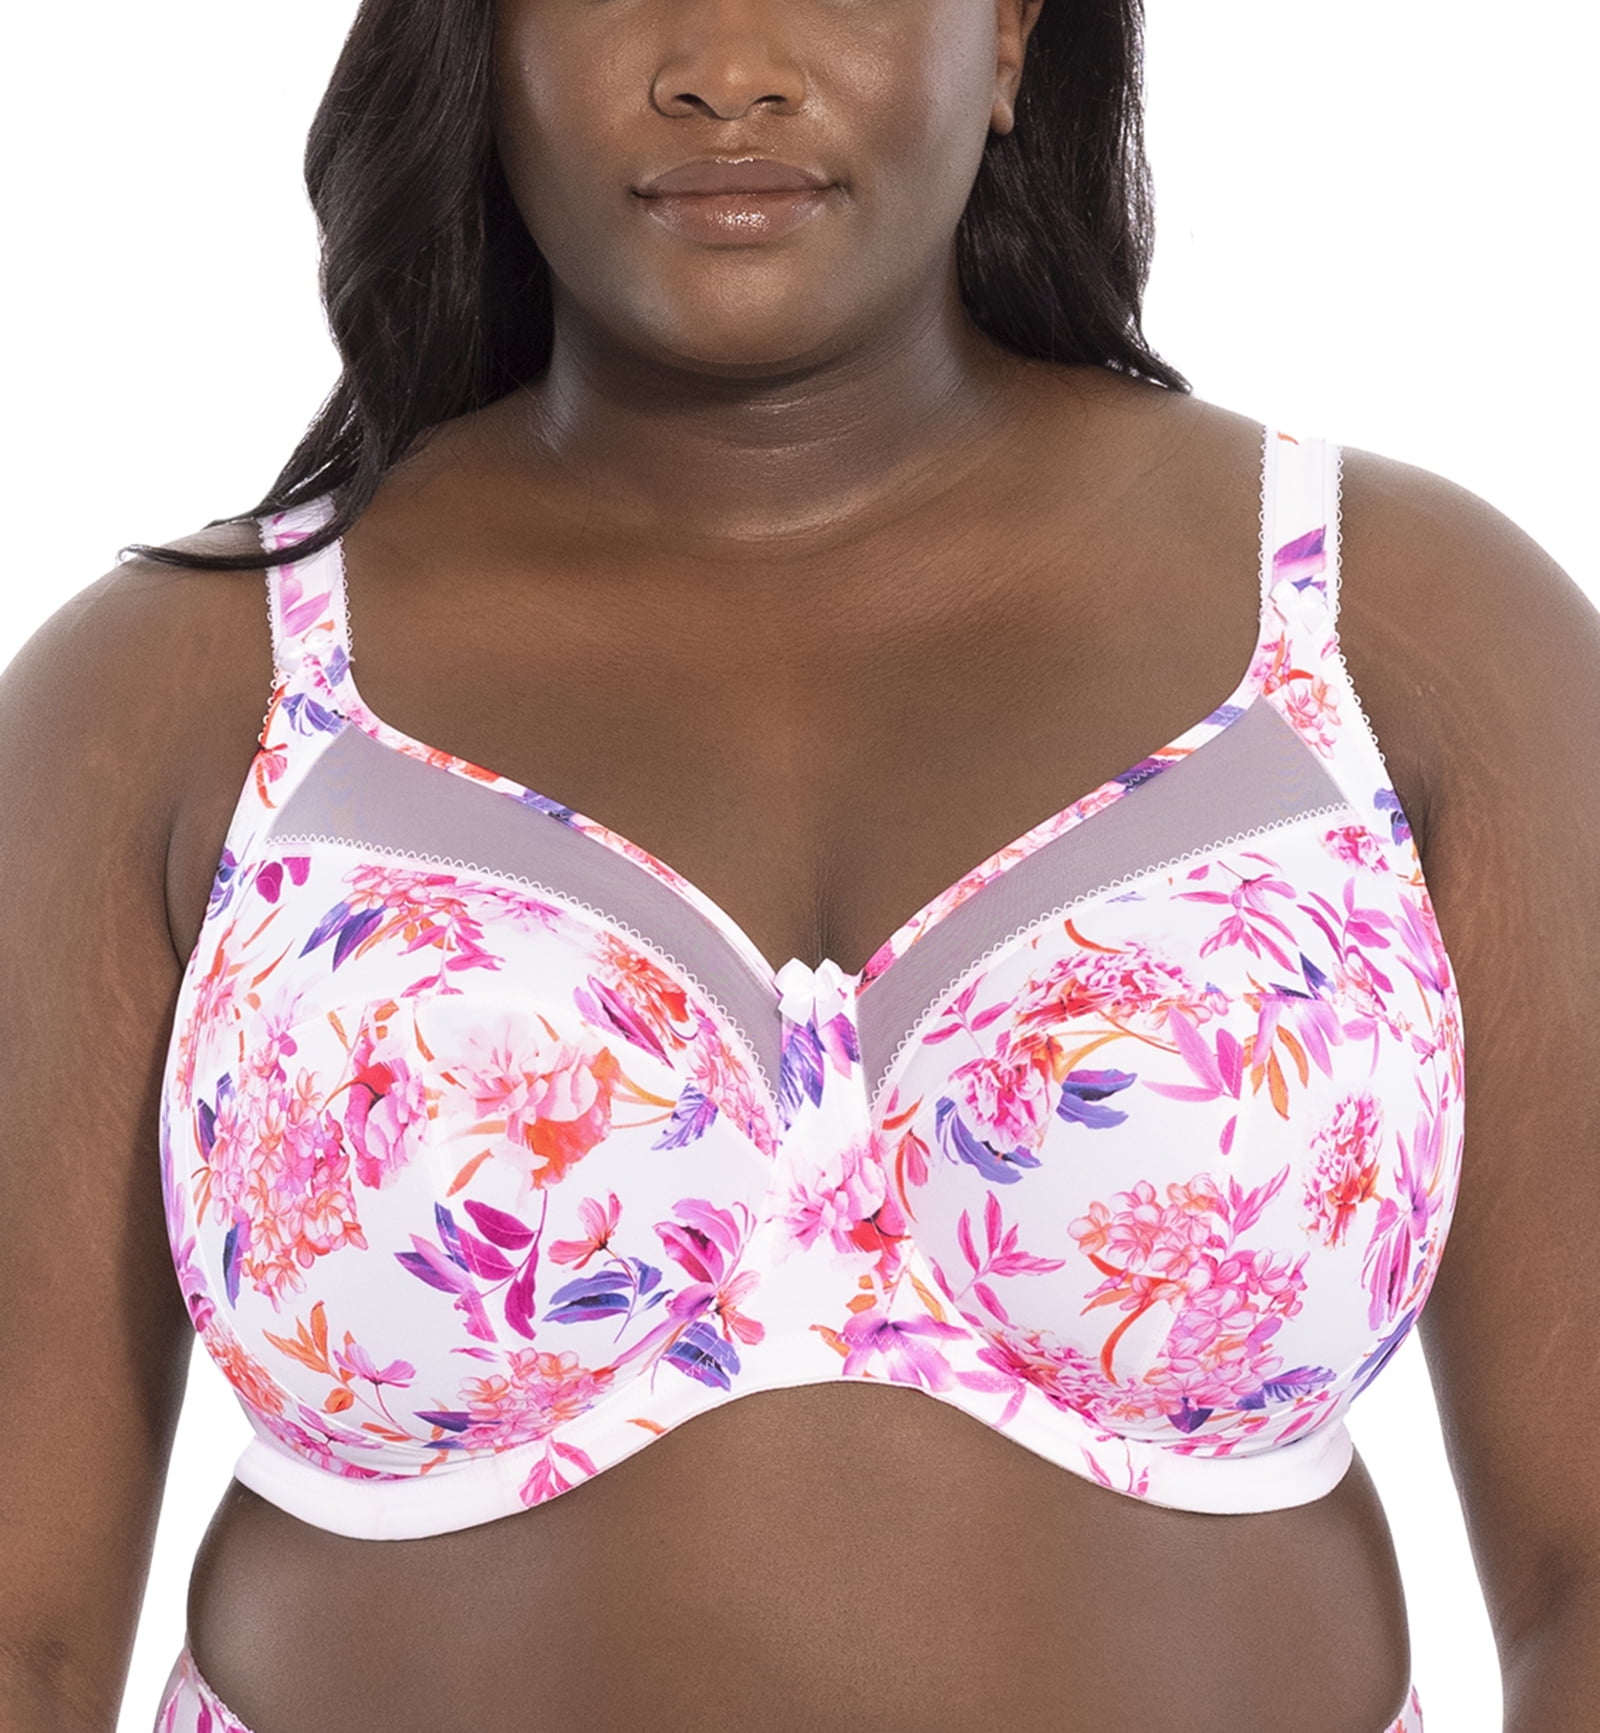 Goddess Kayla Banded Full Cup Underwire Bra (6164),36G,Taupe Leopard 